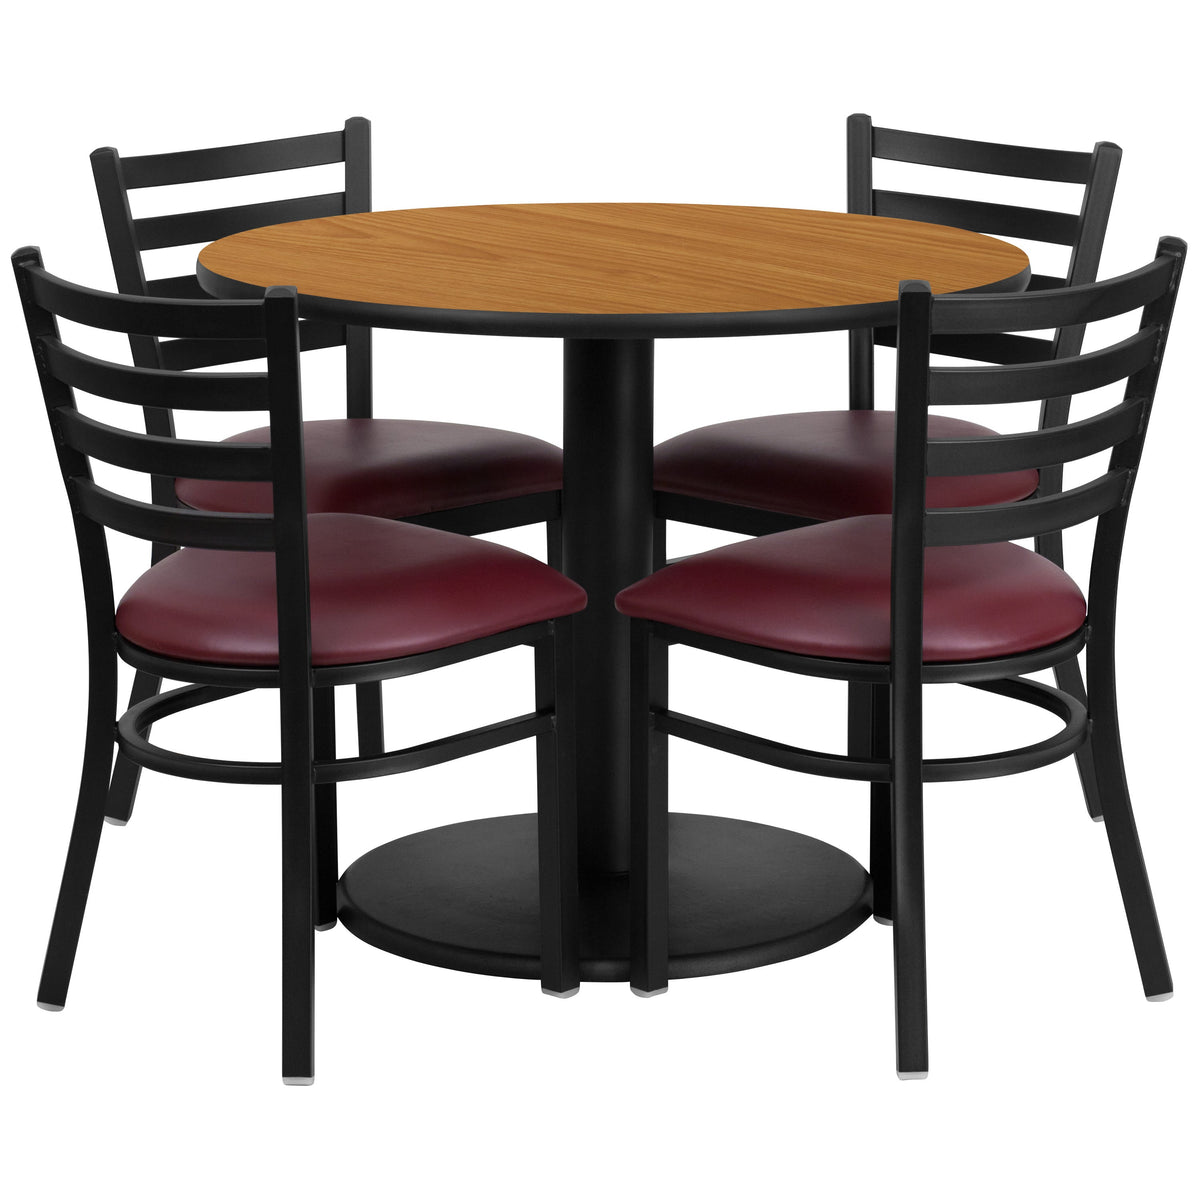 Natural Top/Burgundy Vinyl Seat |#| 36inch RD Natural Laminate Table with Round Base & 4 Metal Chairs-Burg Vinyl Seat